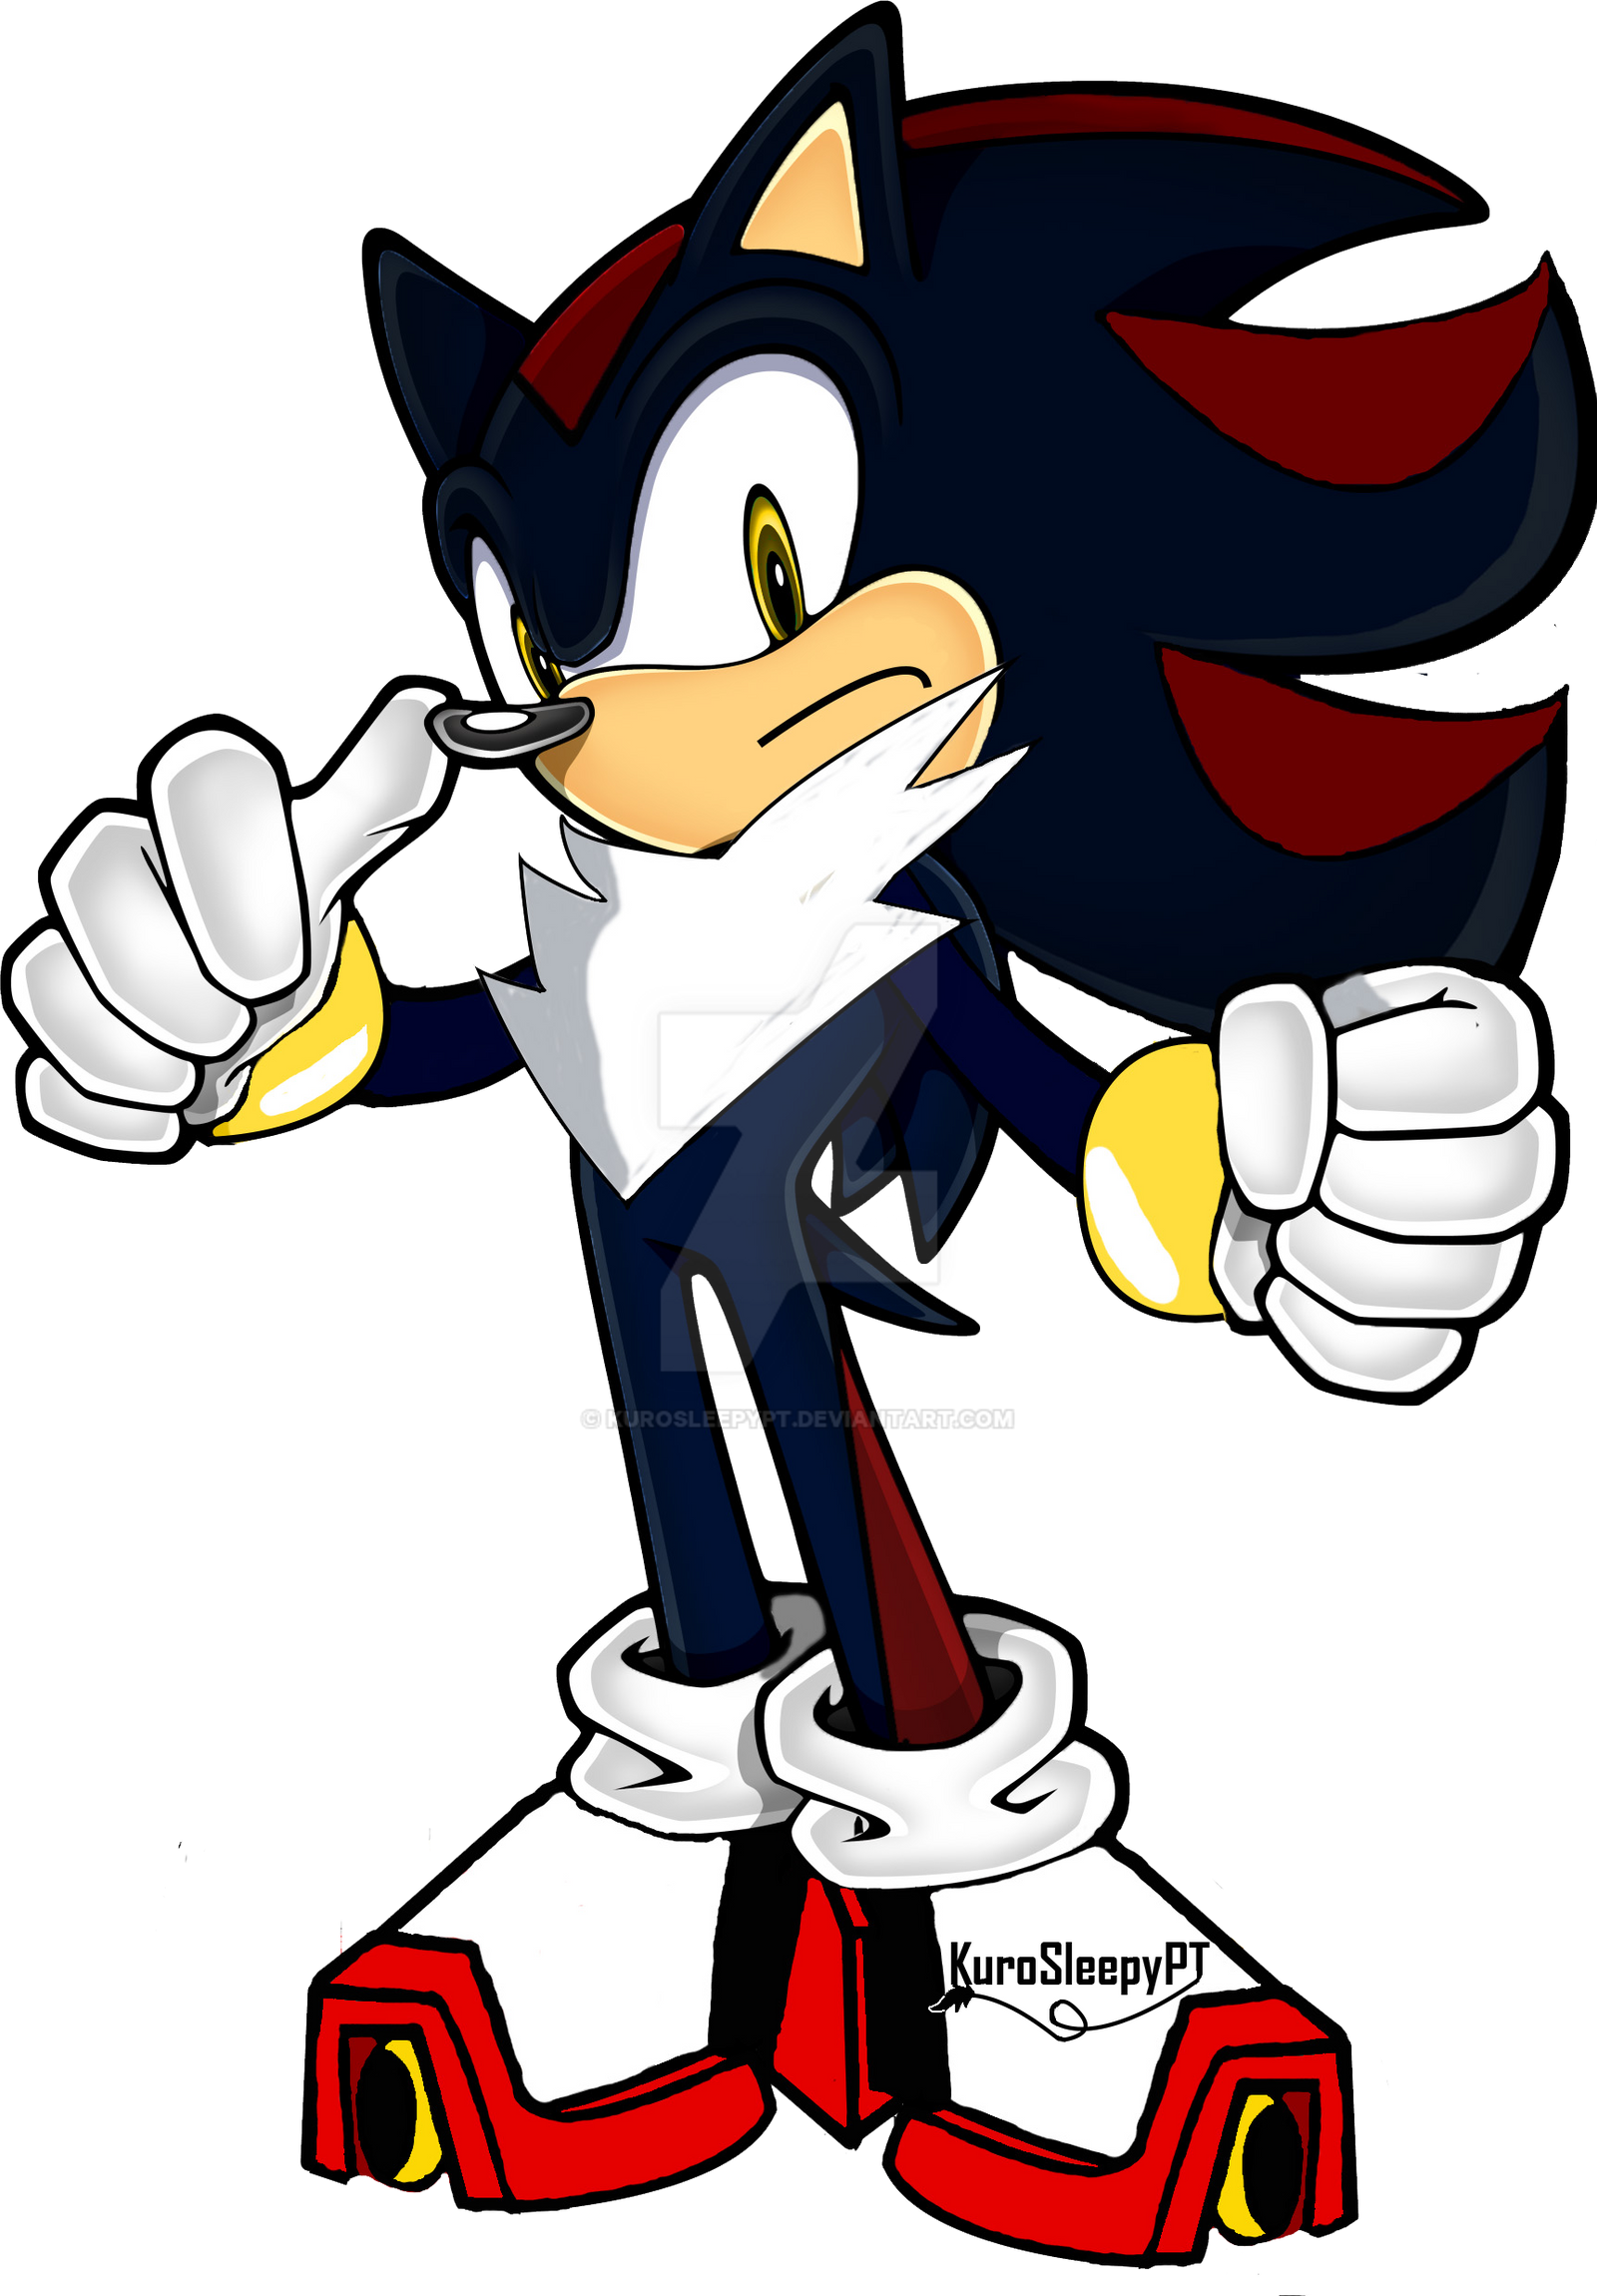 Sonic and Shadow fusion by Stephon1234 on DeviantArt